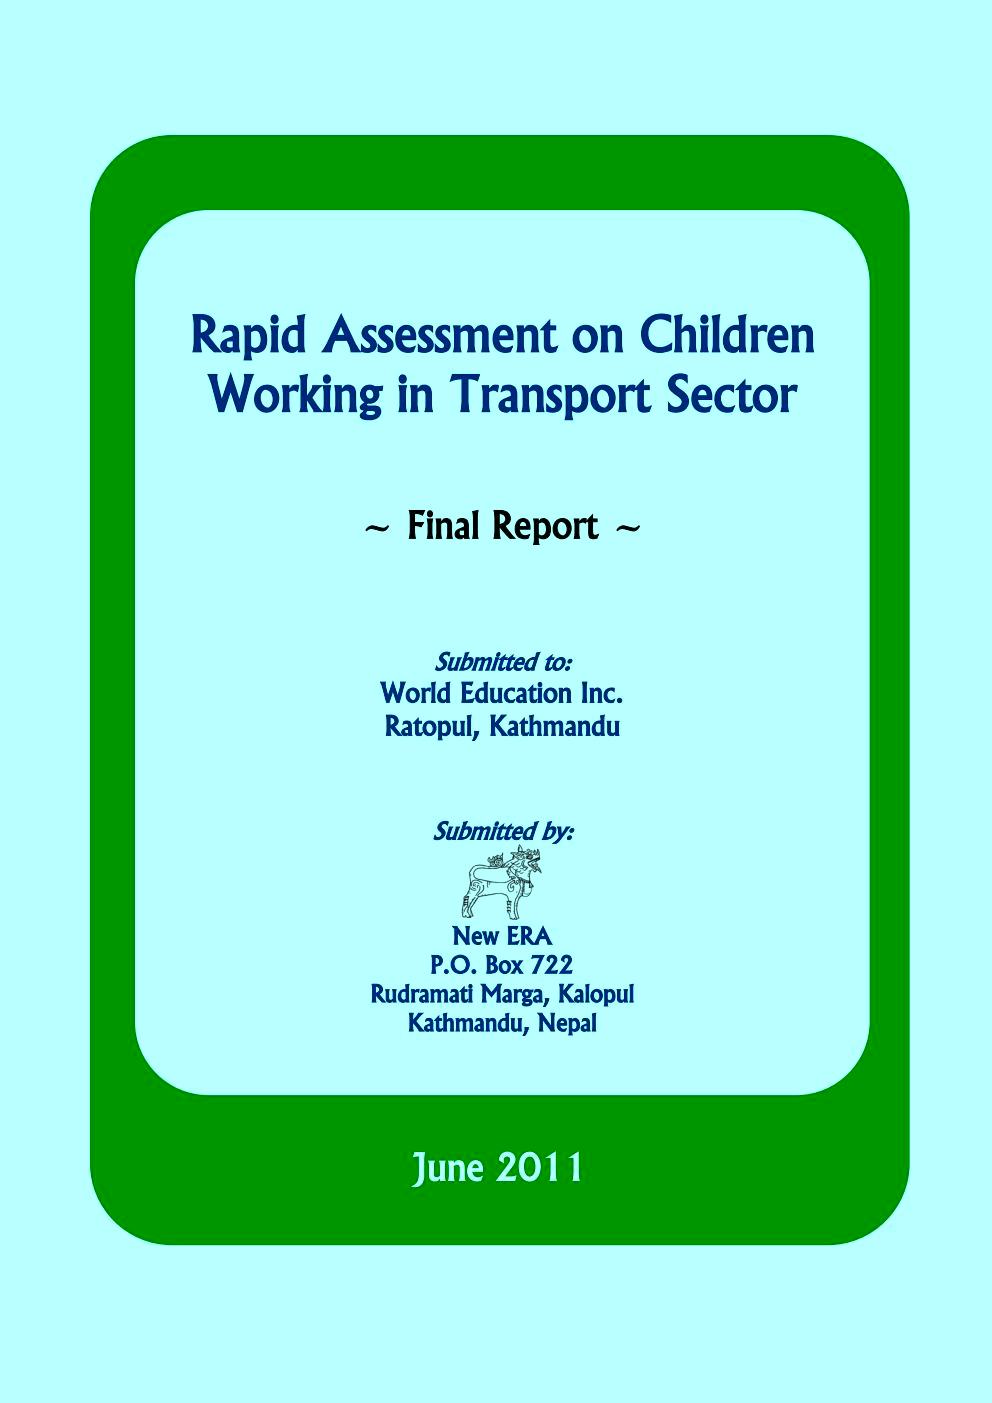 Rapid Assessment on Children Working in Transport Sector